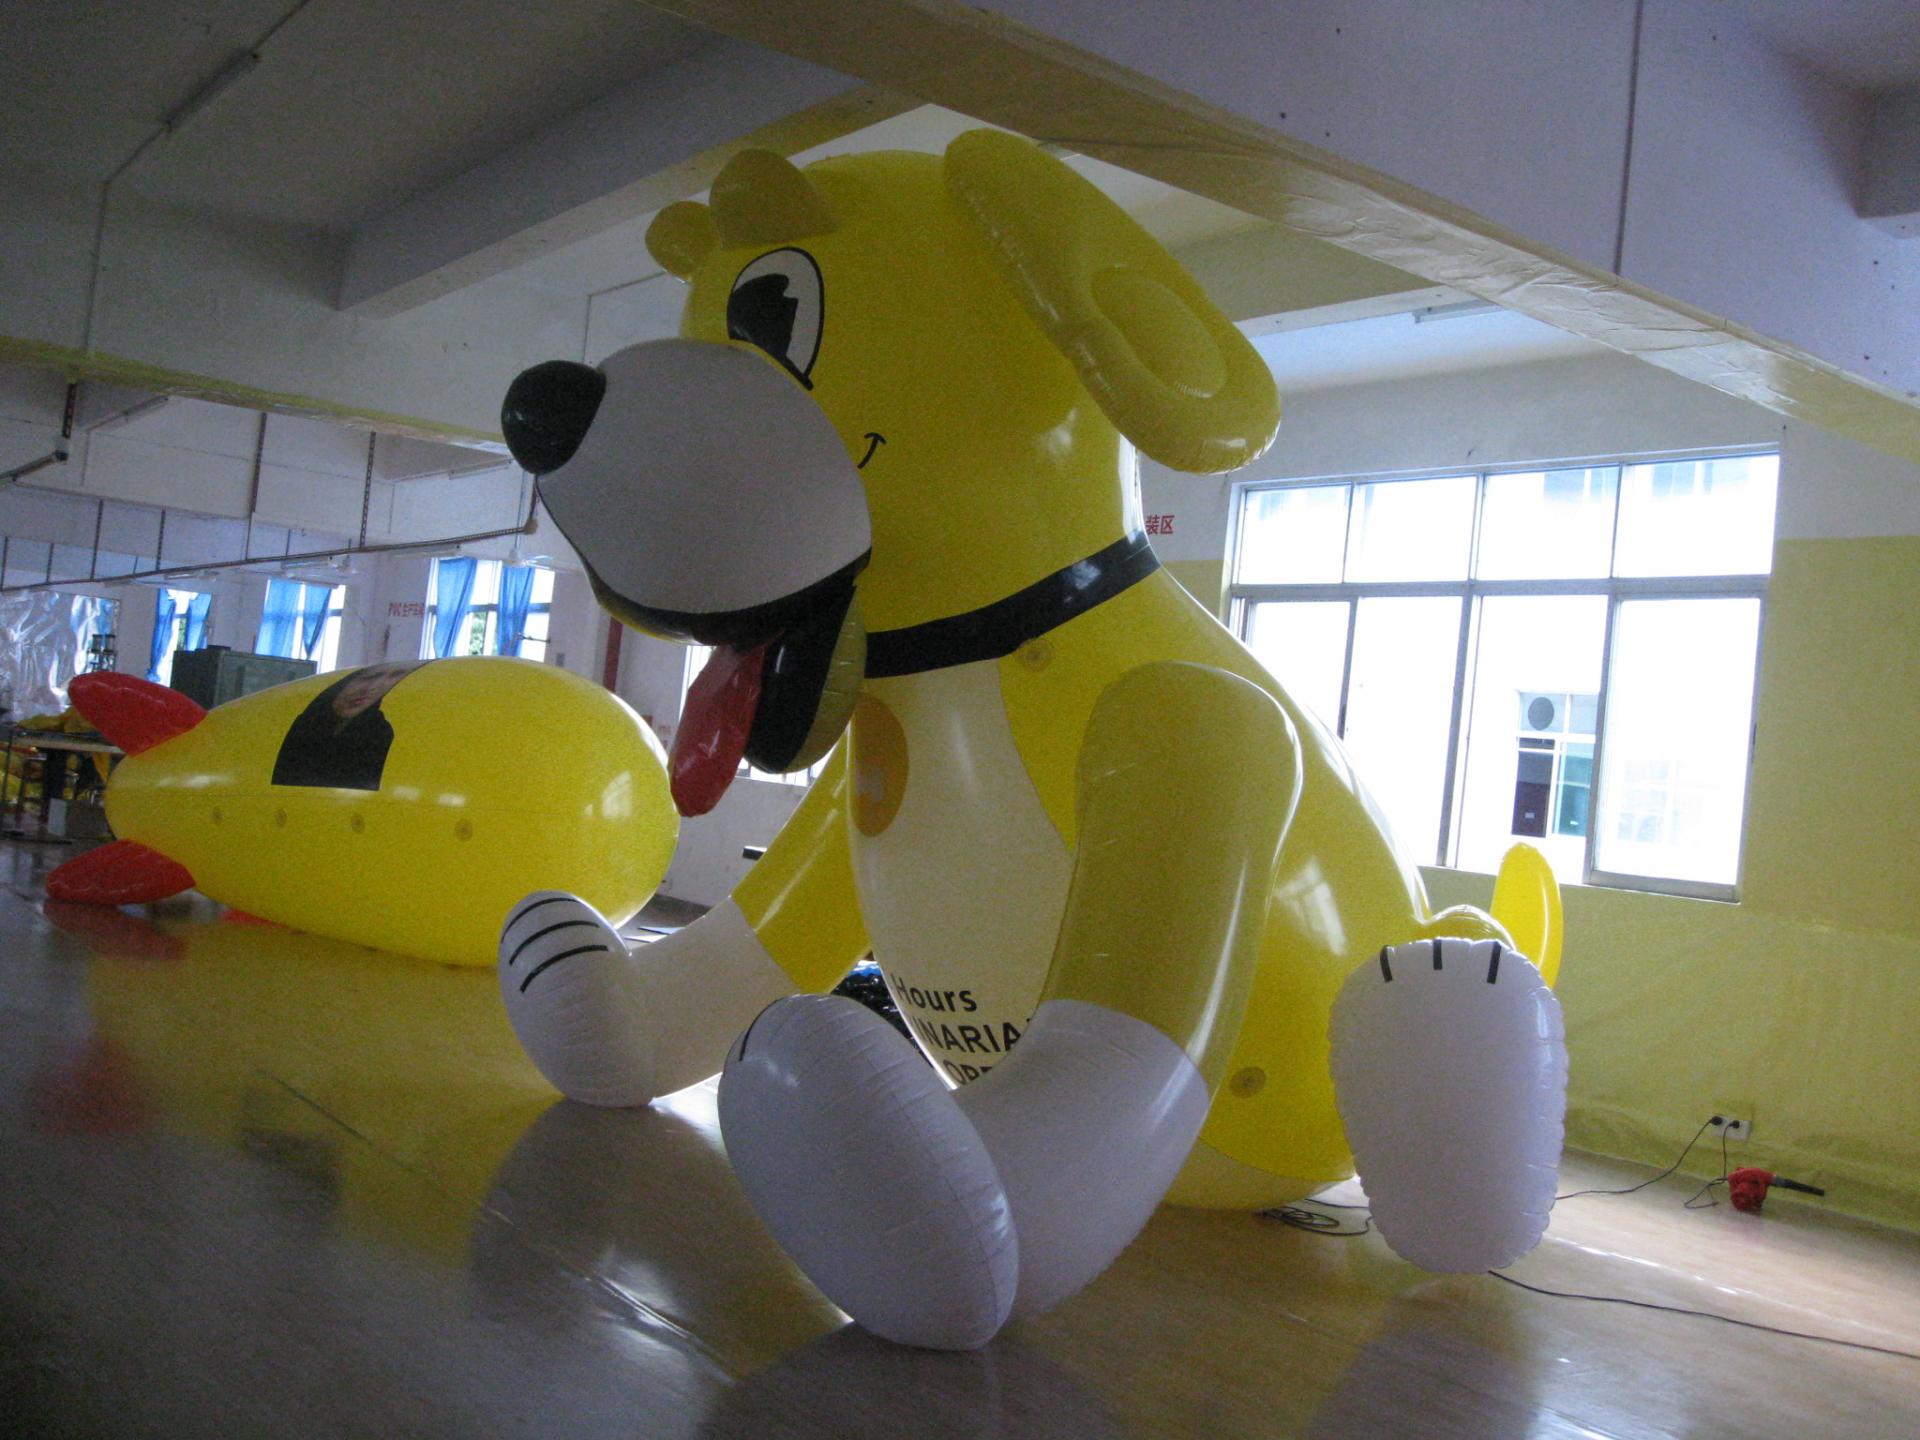 Customised PVC Inflatable Giant Large Huge Dog Inflate With Air, Helium Or Water For Advertising